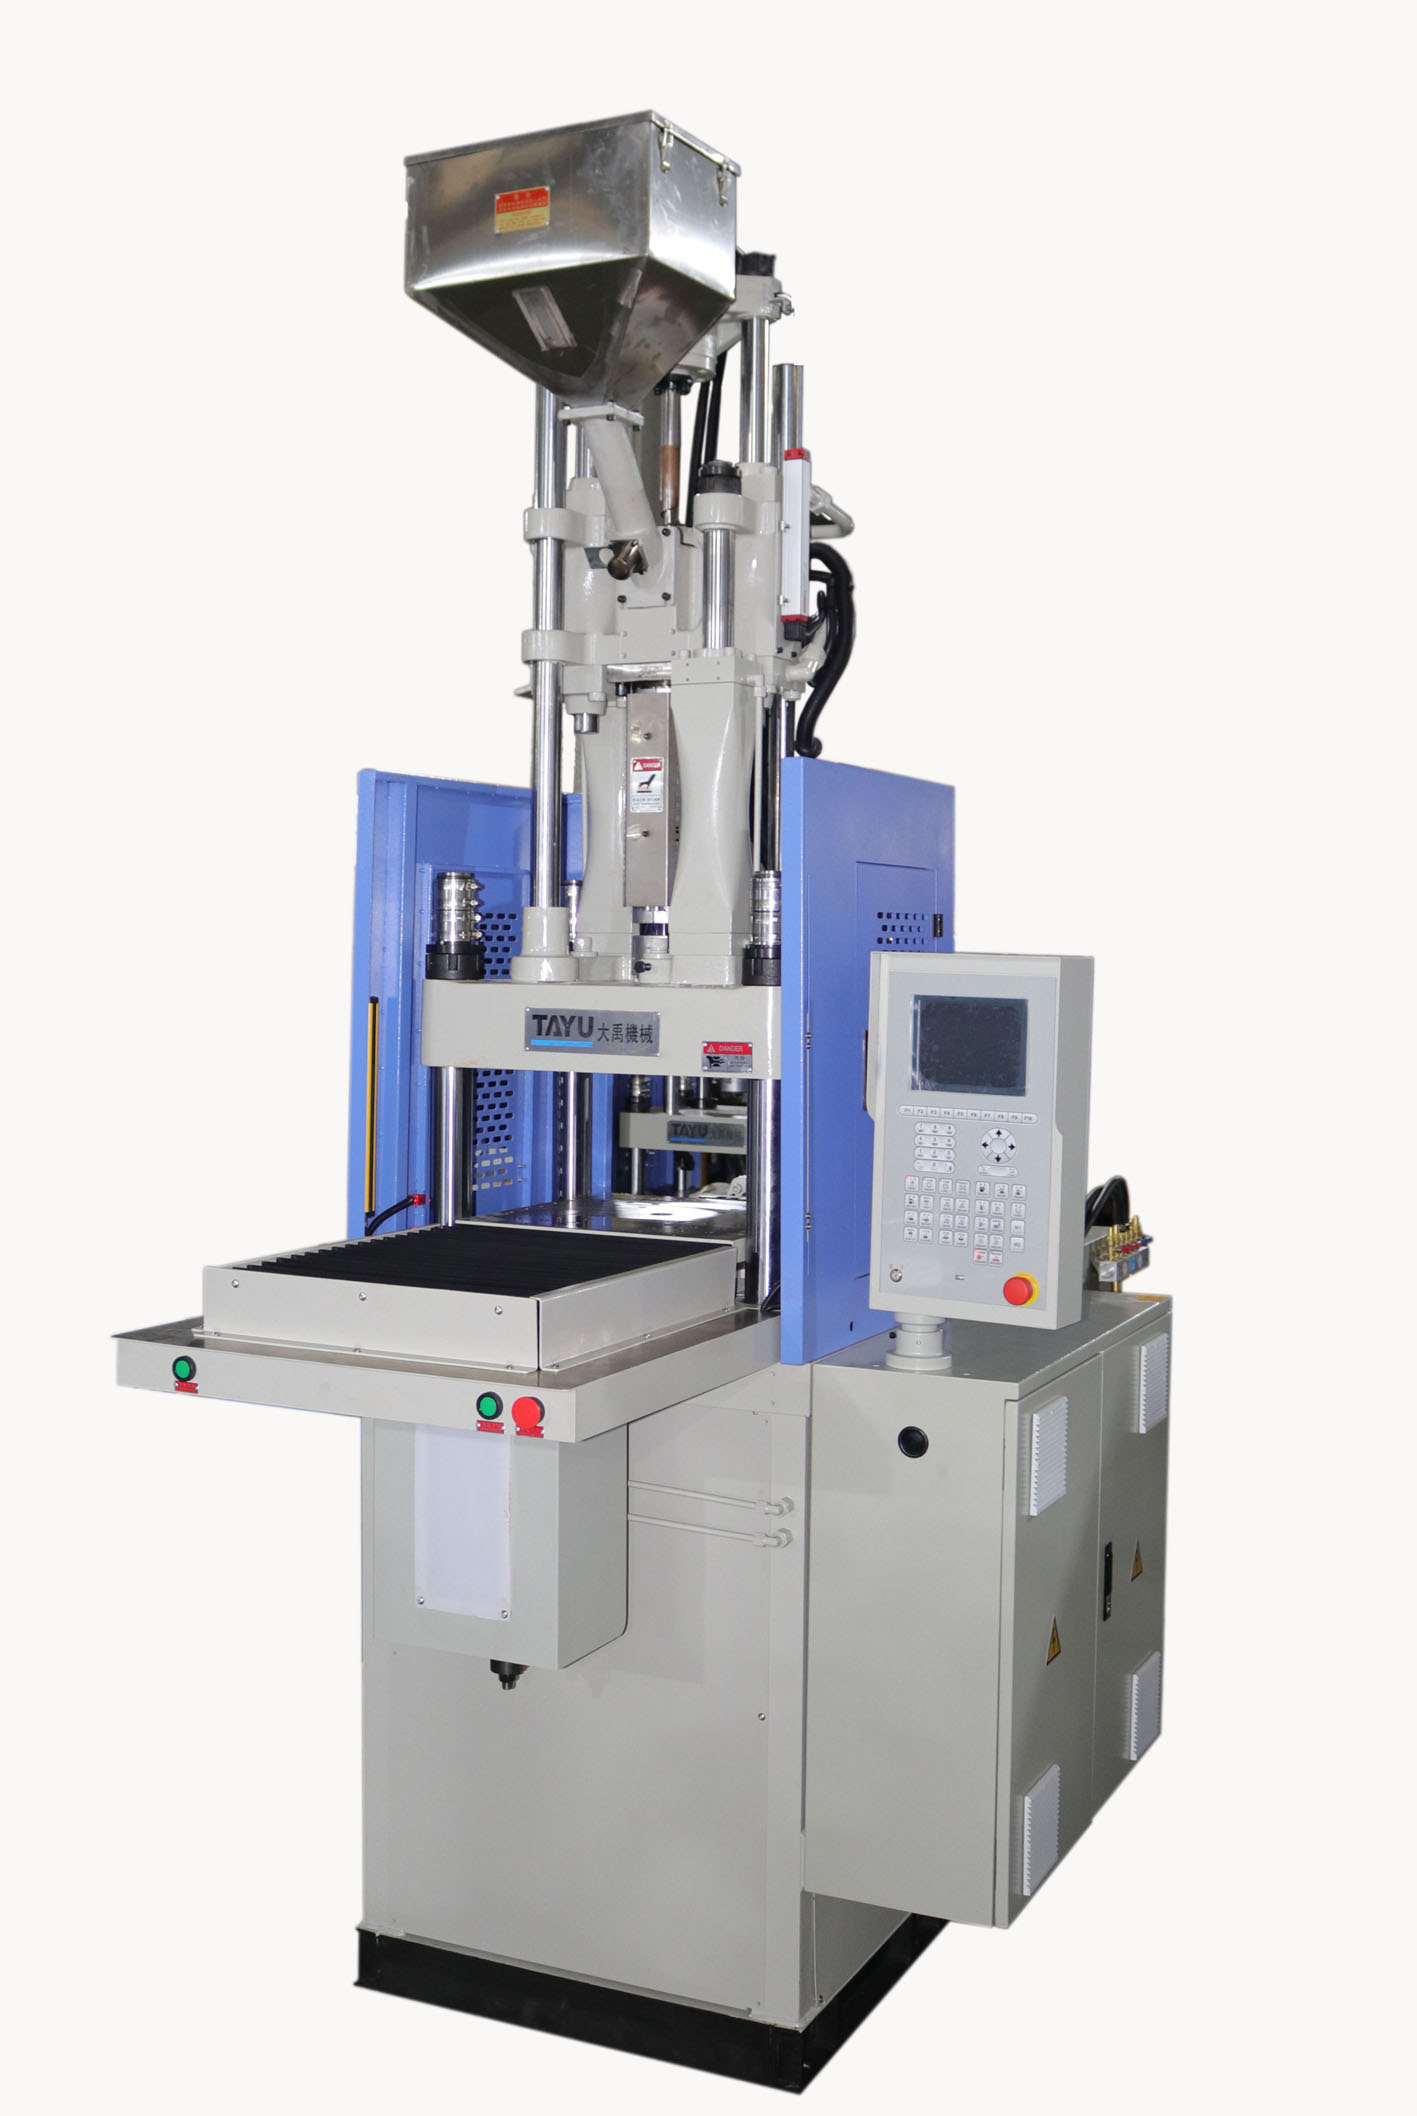 TY-850S vertical injection molding machine